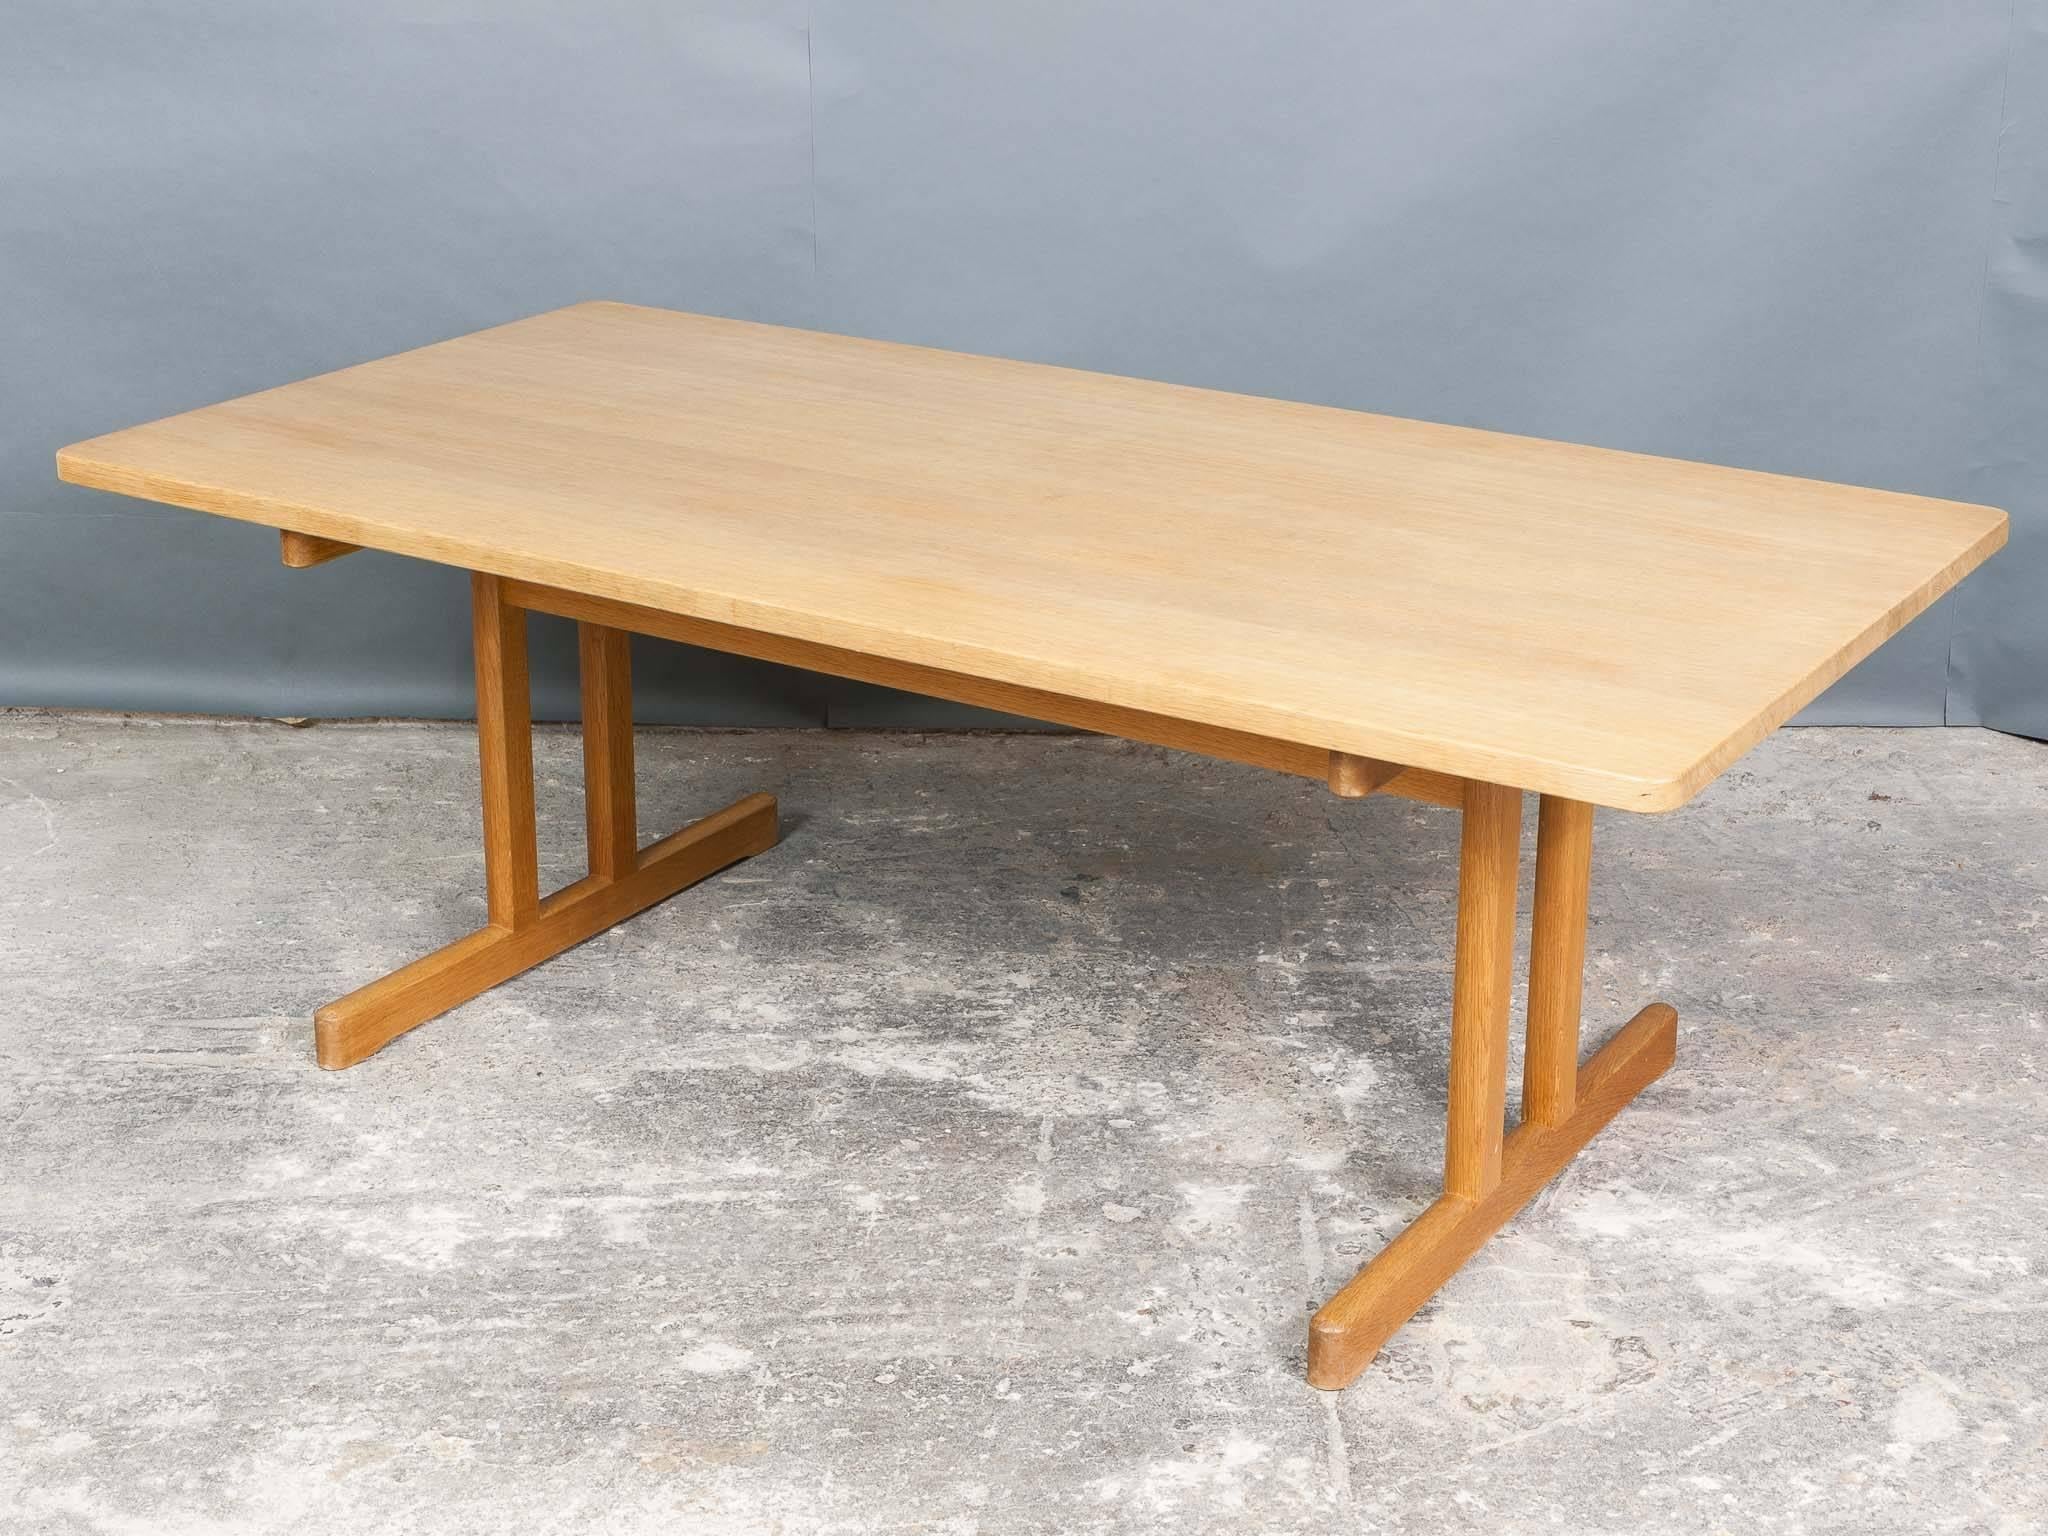 Large solid oak Børge Mogensen model 5267 Shaker coffee table. Designed in 1965. The coffee table was originally designed and inspired by the American Shaker's tradition for simplicity and functionality. Manufactured in Denmark by Fredericia